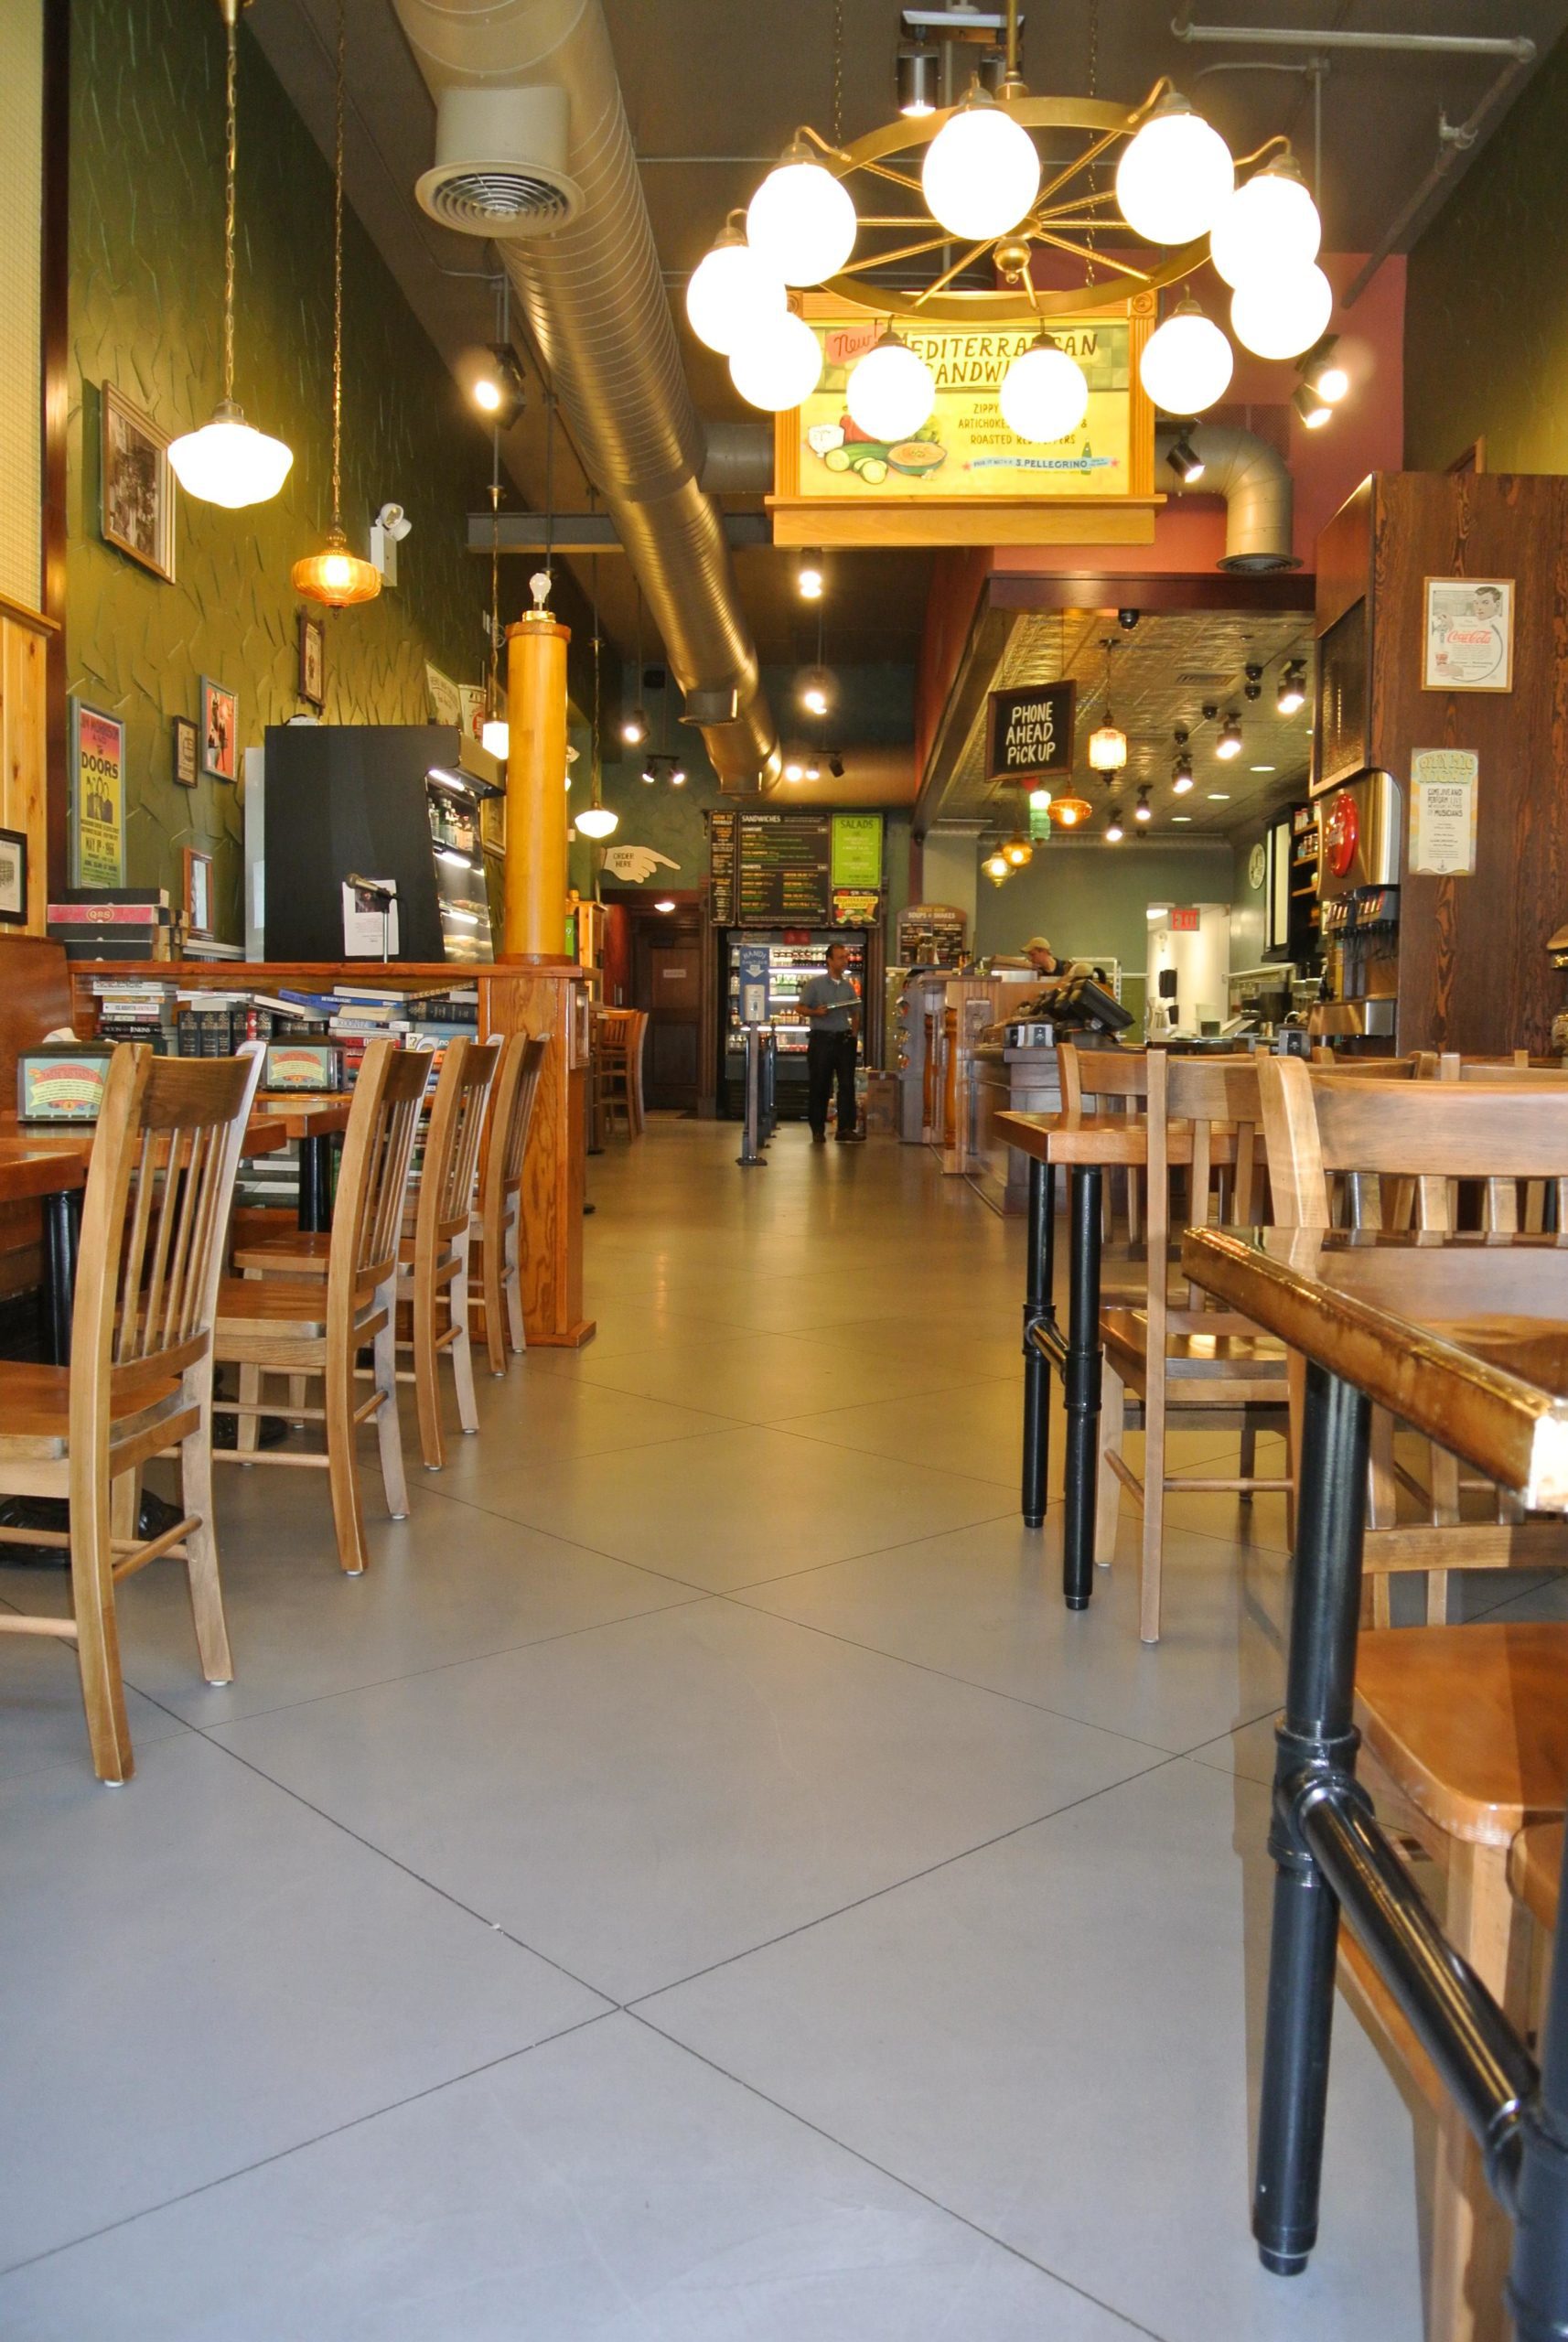 Remodeling Restaurants in NYC with Polished Concrete Flooring | Duraamen Engineered Products Inc